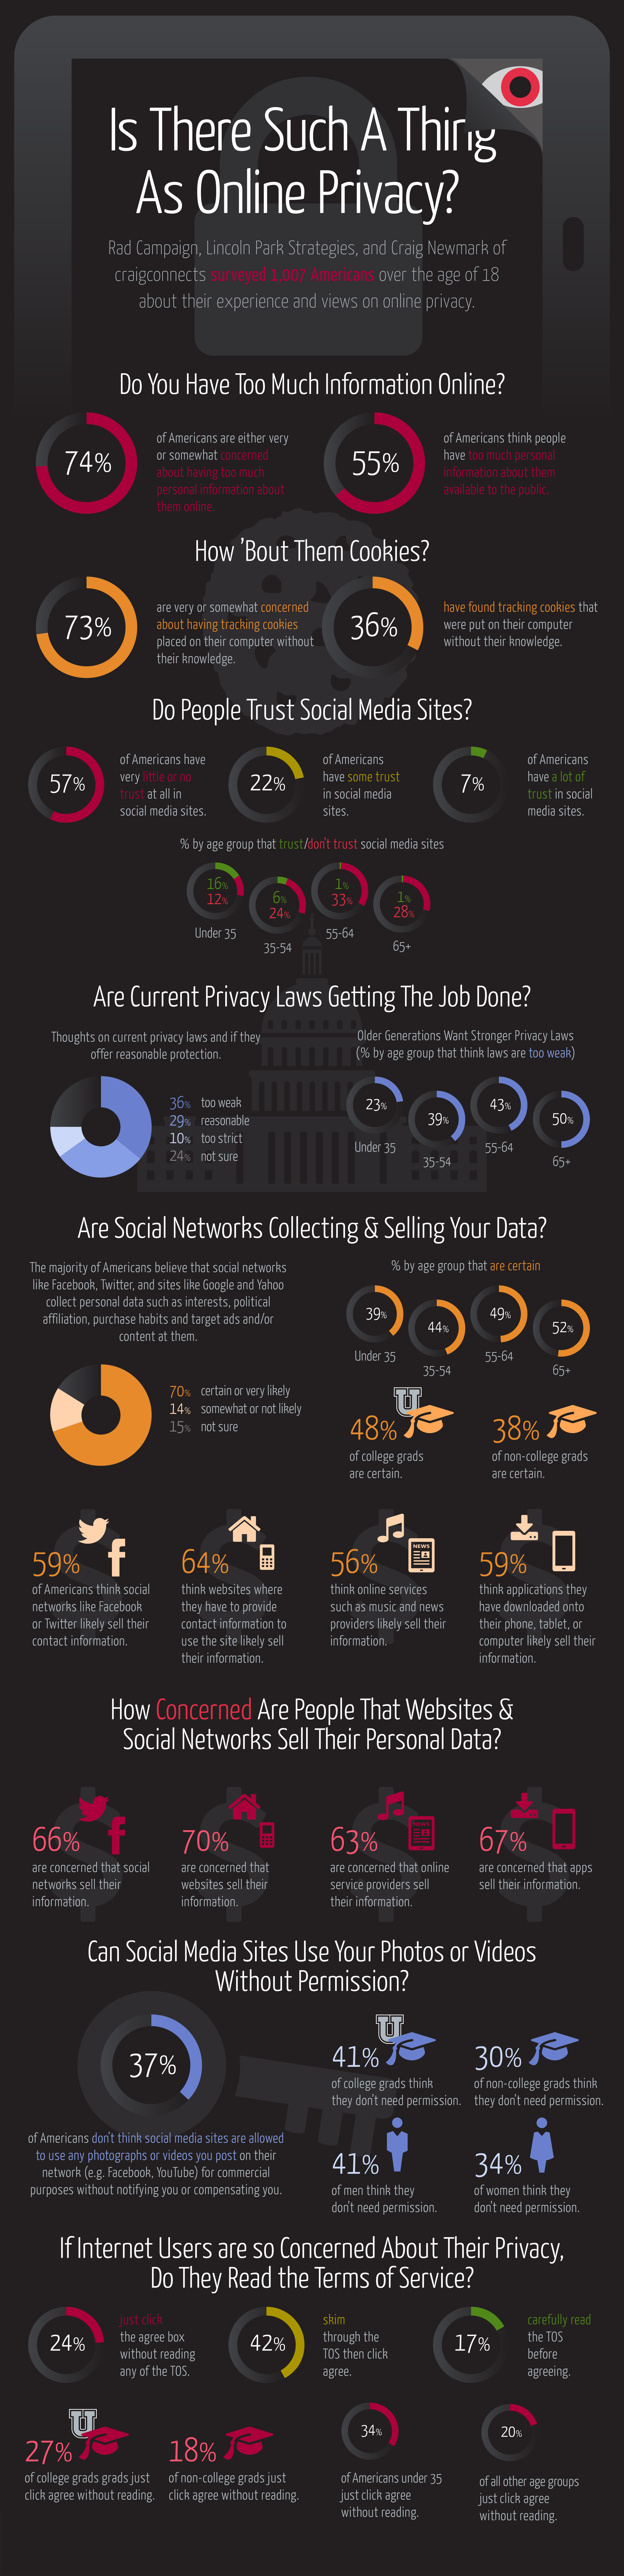 Online Privacy Data 2014